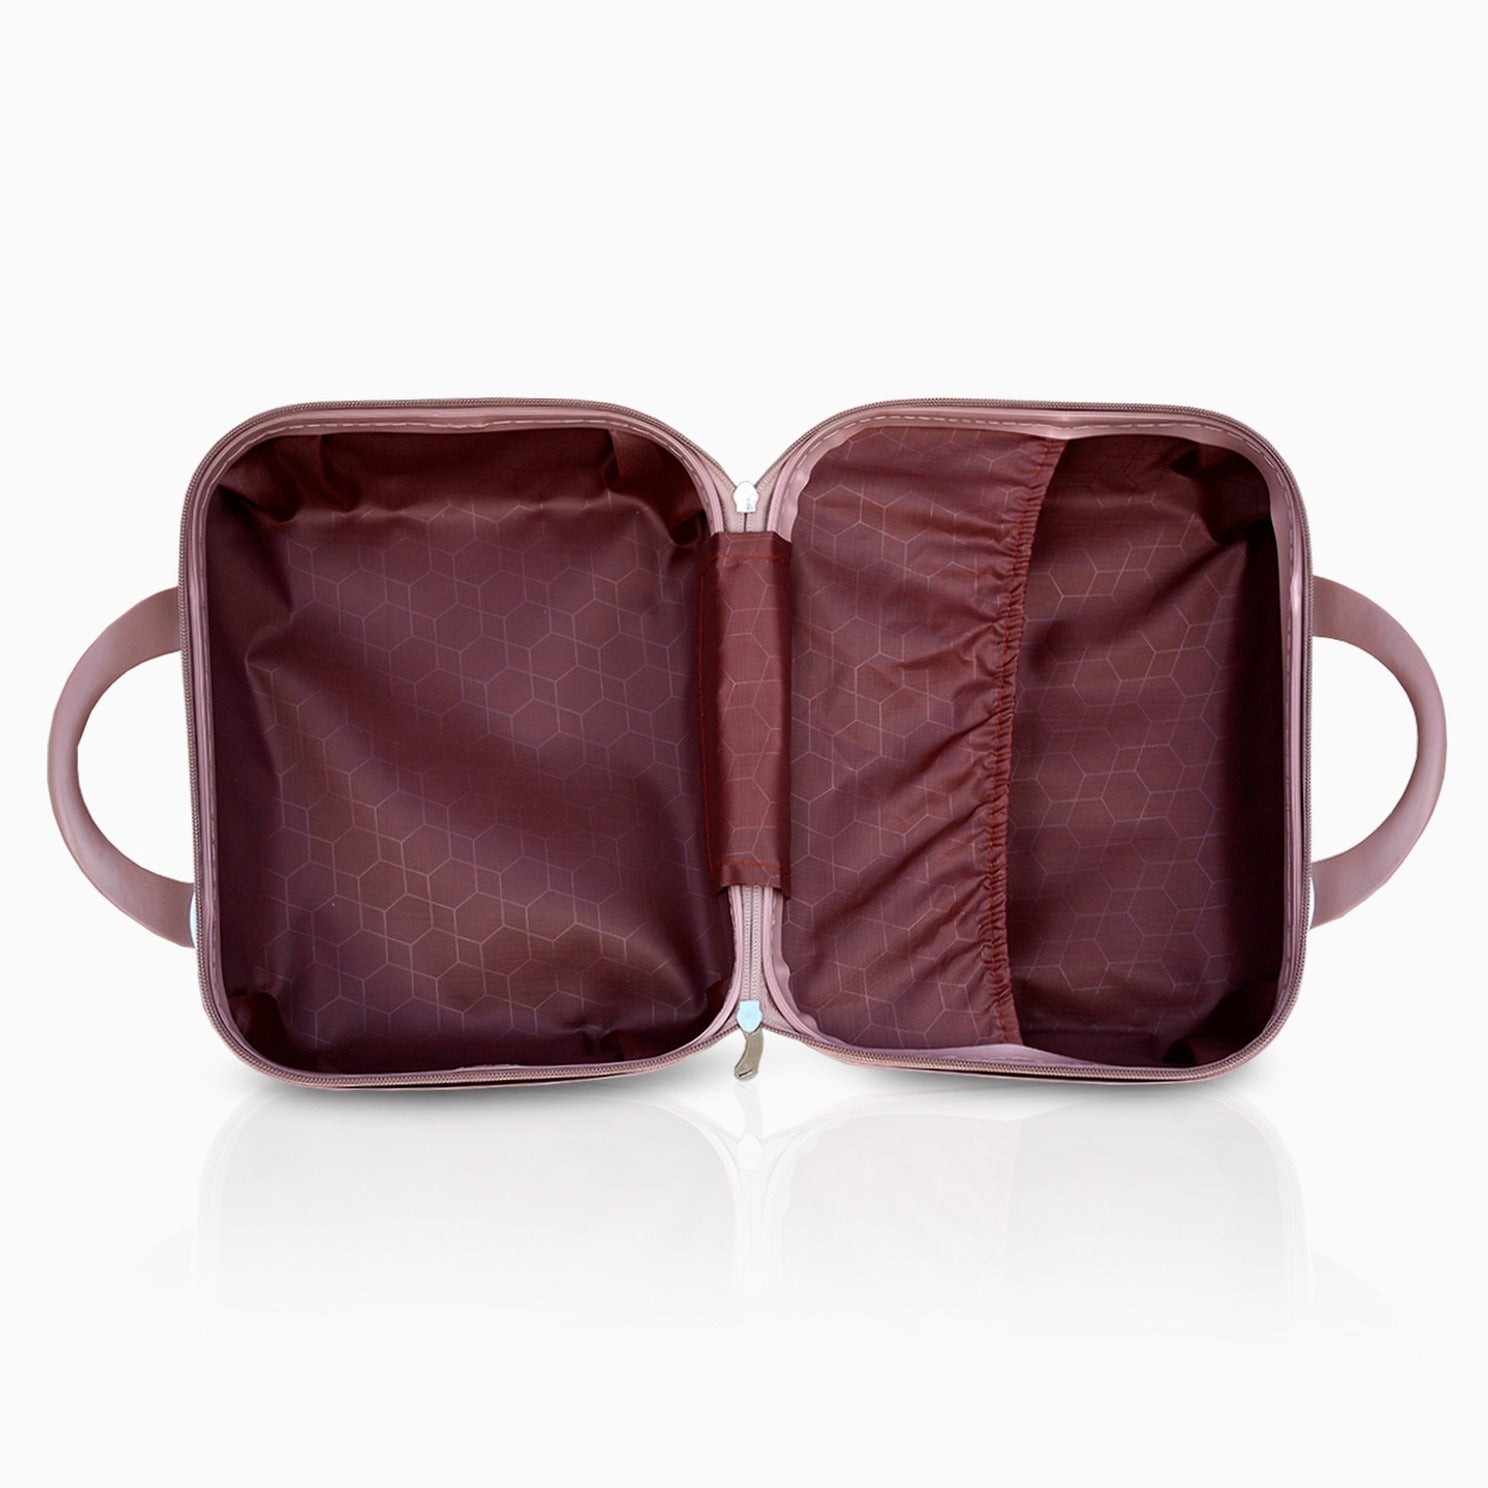 5 Piece Set 7" 20" 24" 28" 32 Inches Rose Gold Colour Square Cut ABS Lightweight Beauty Case Bag Zaappy.com